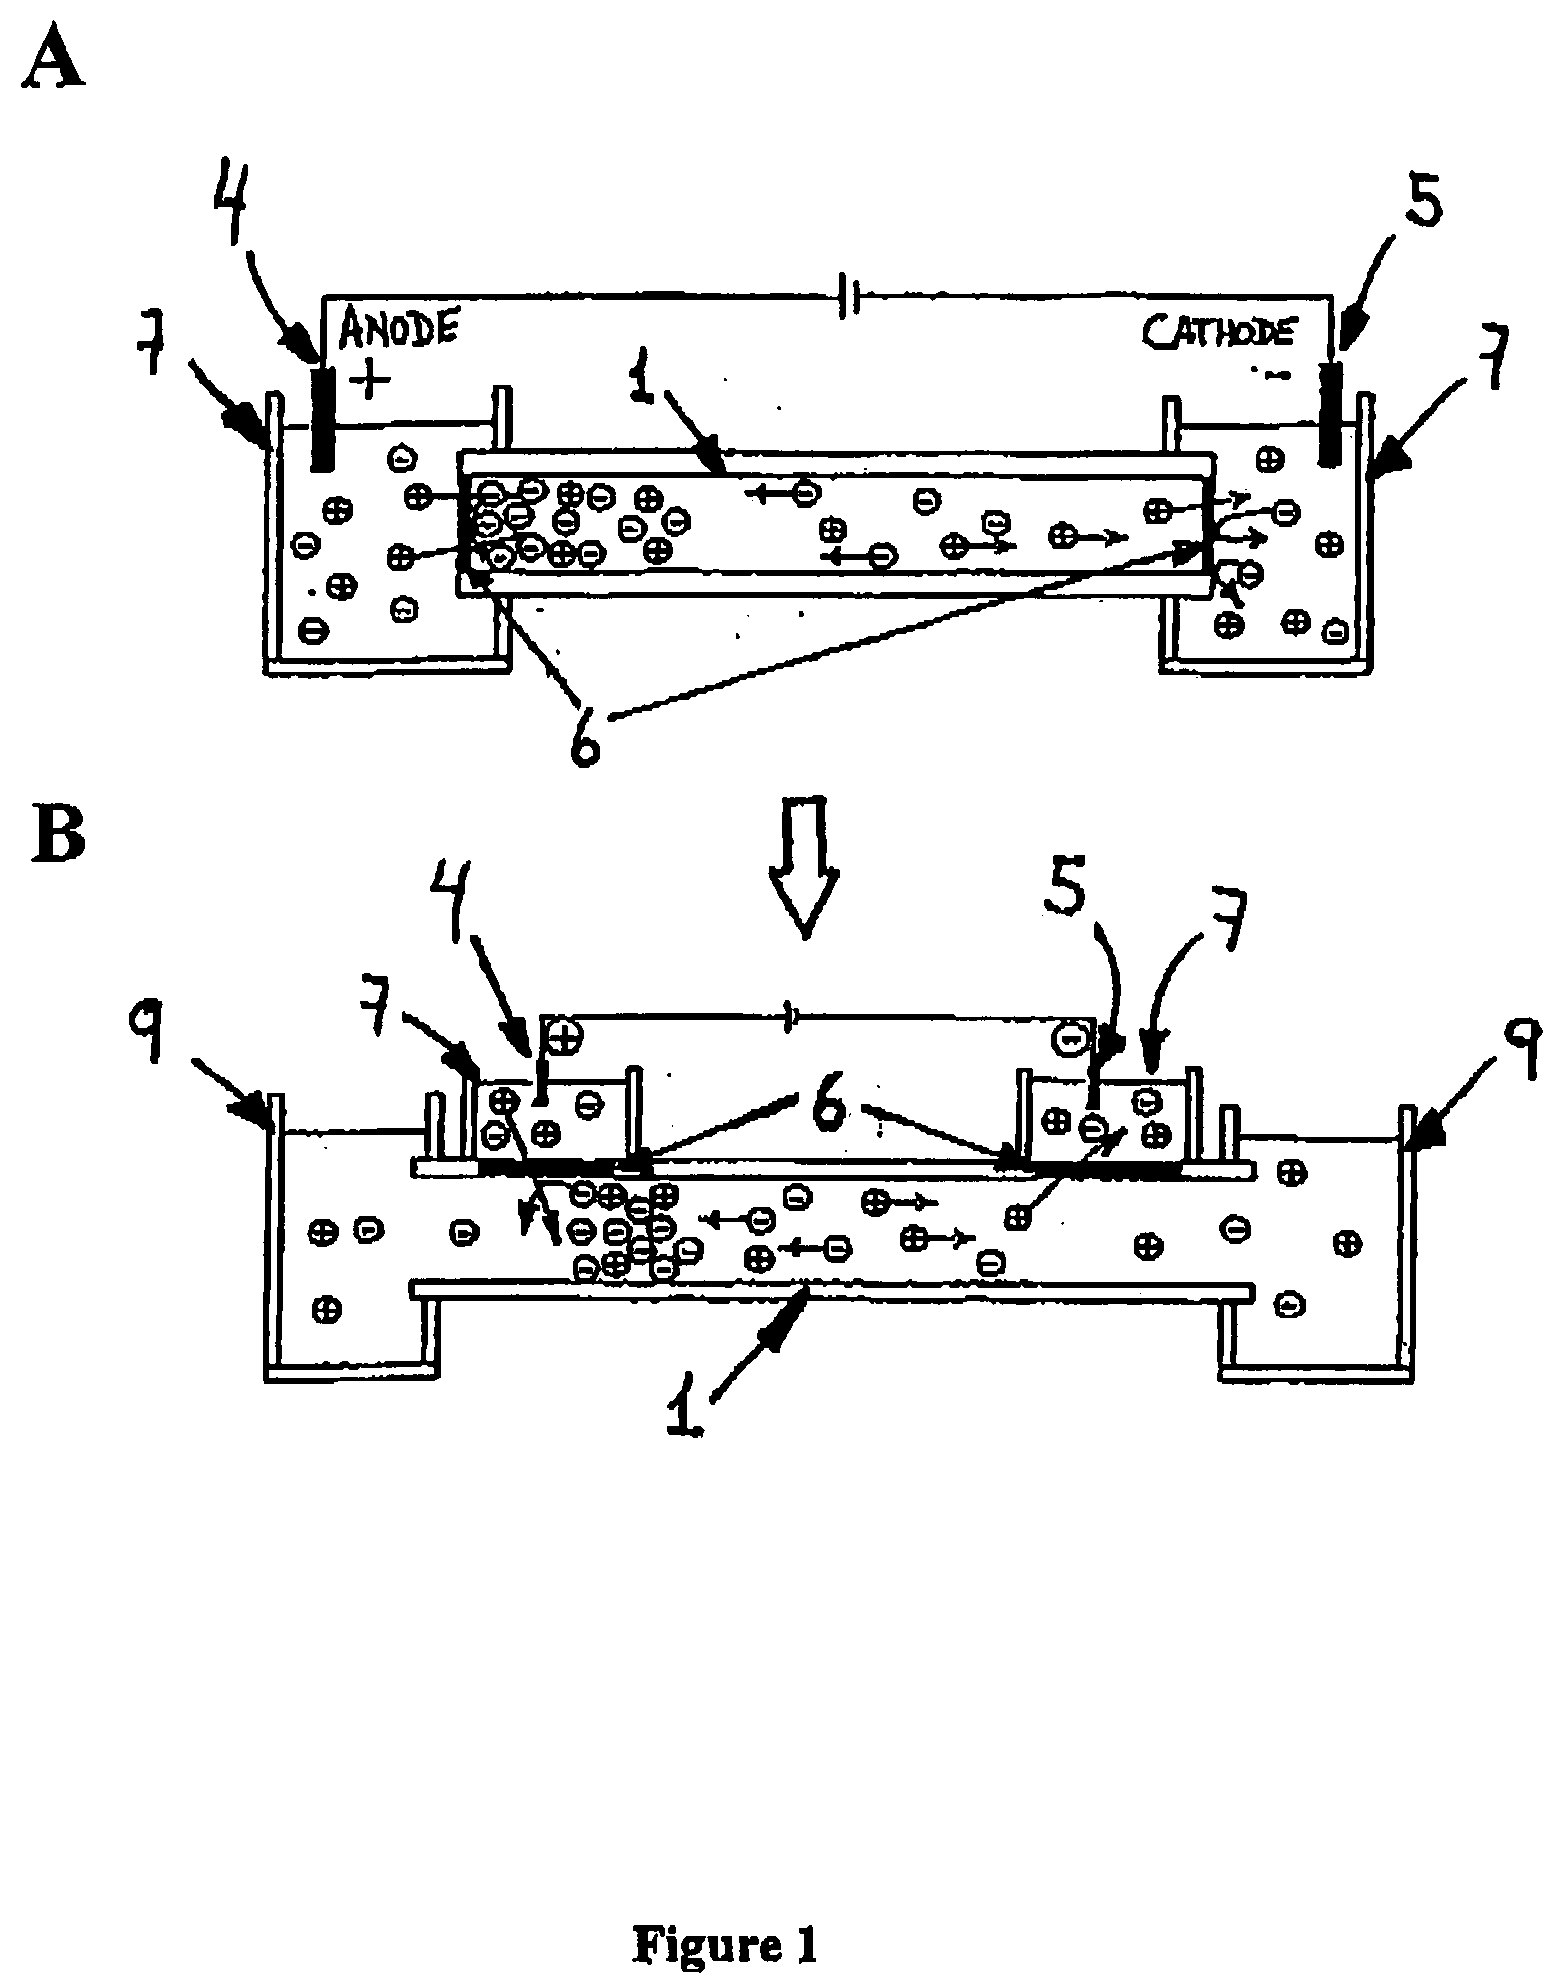 Method and device for capturing charged molecules traveling in a flow stream